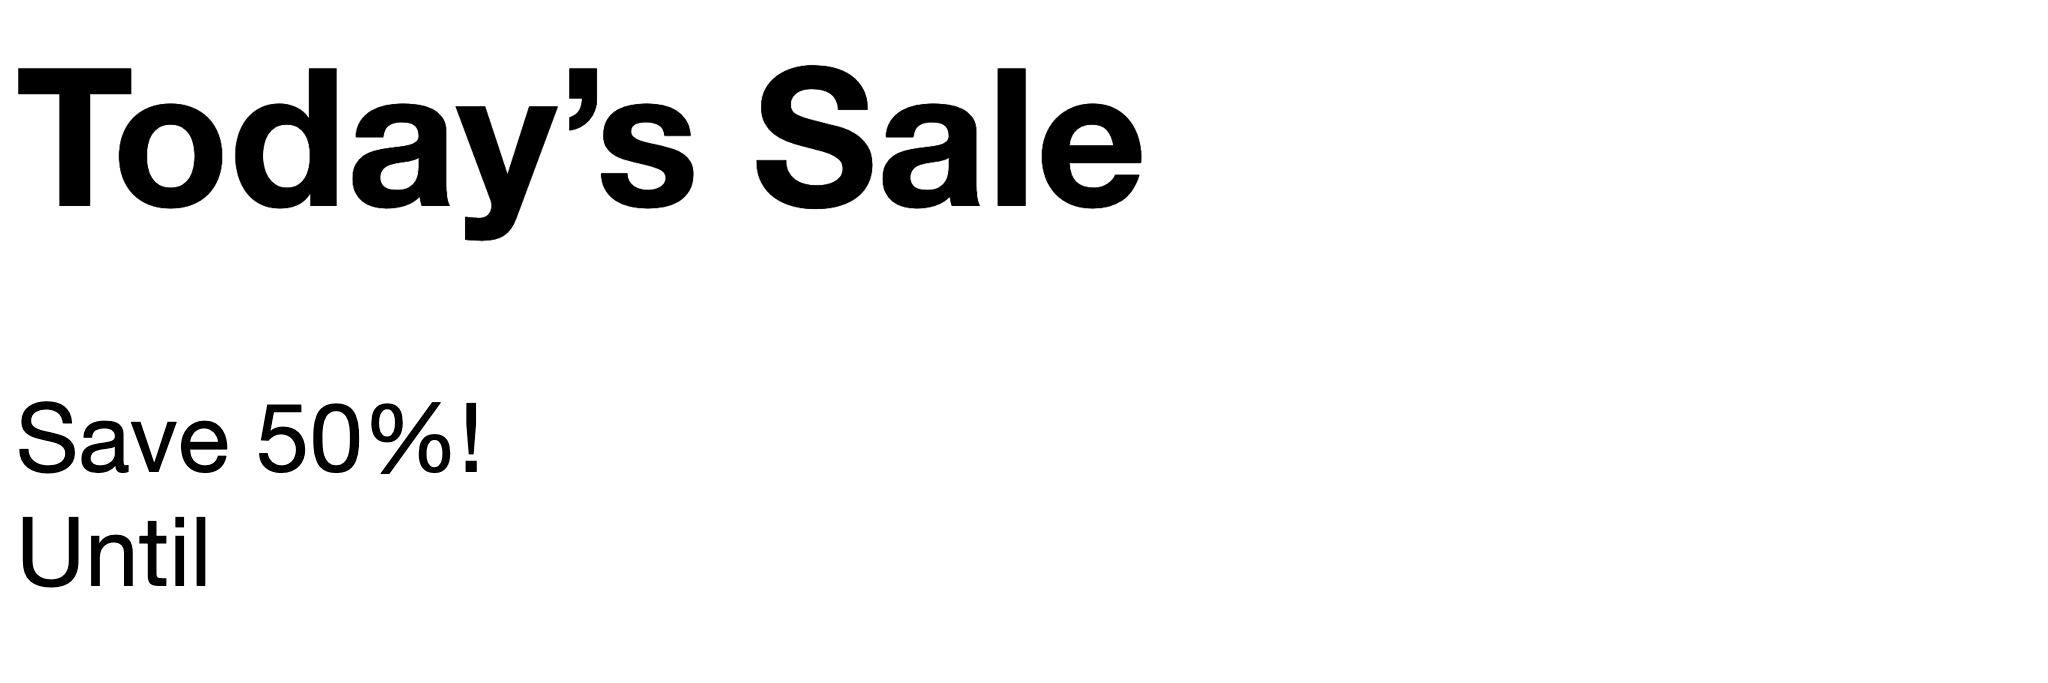 Web Application with Sale Percent